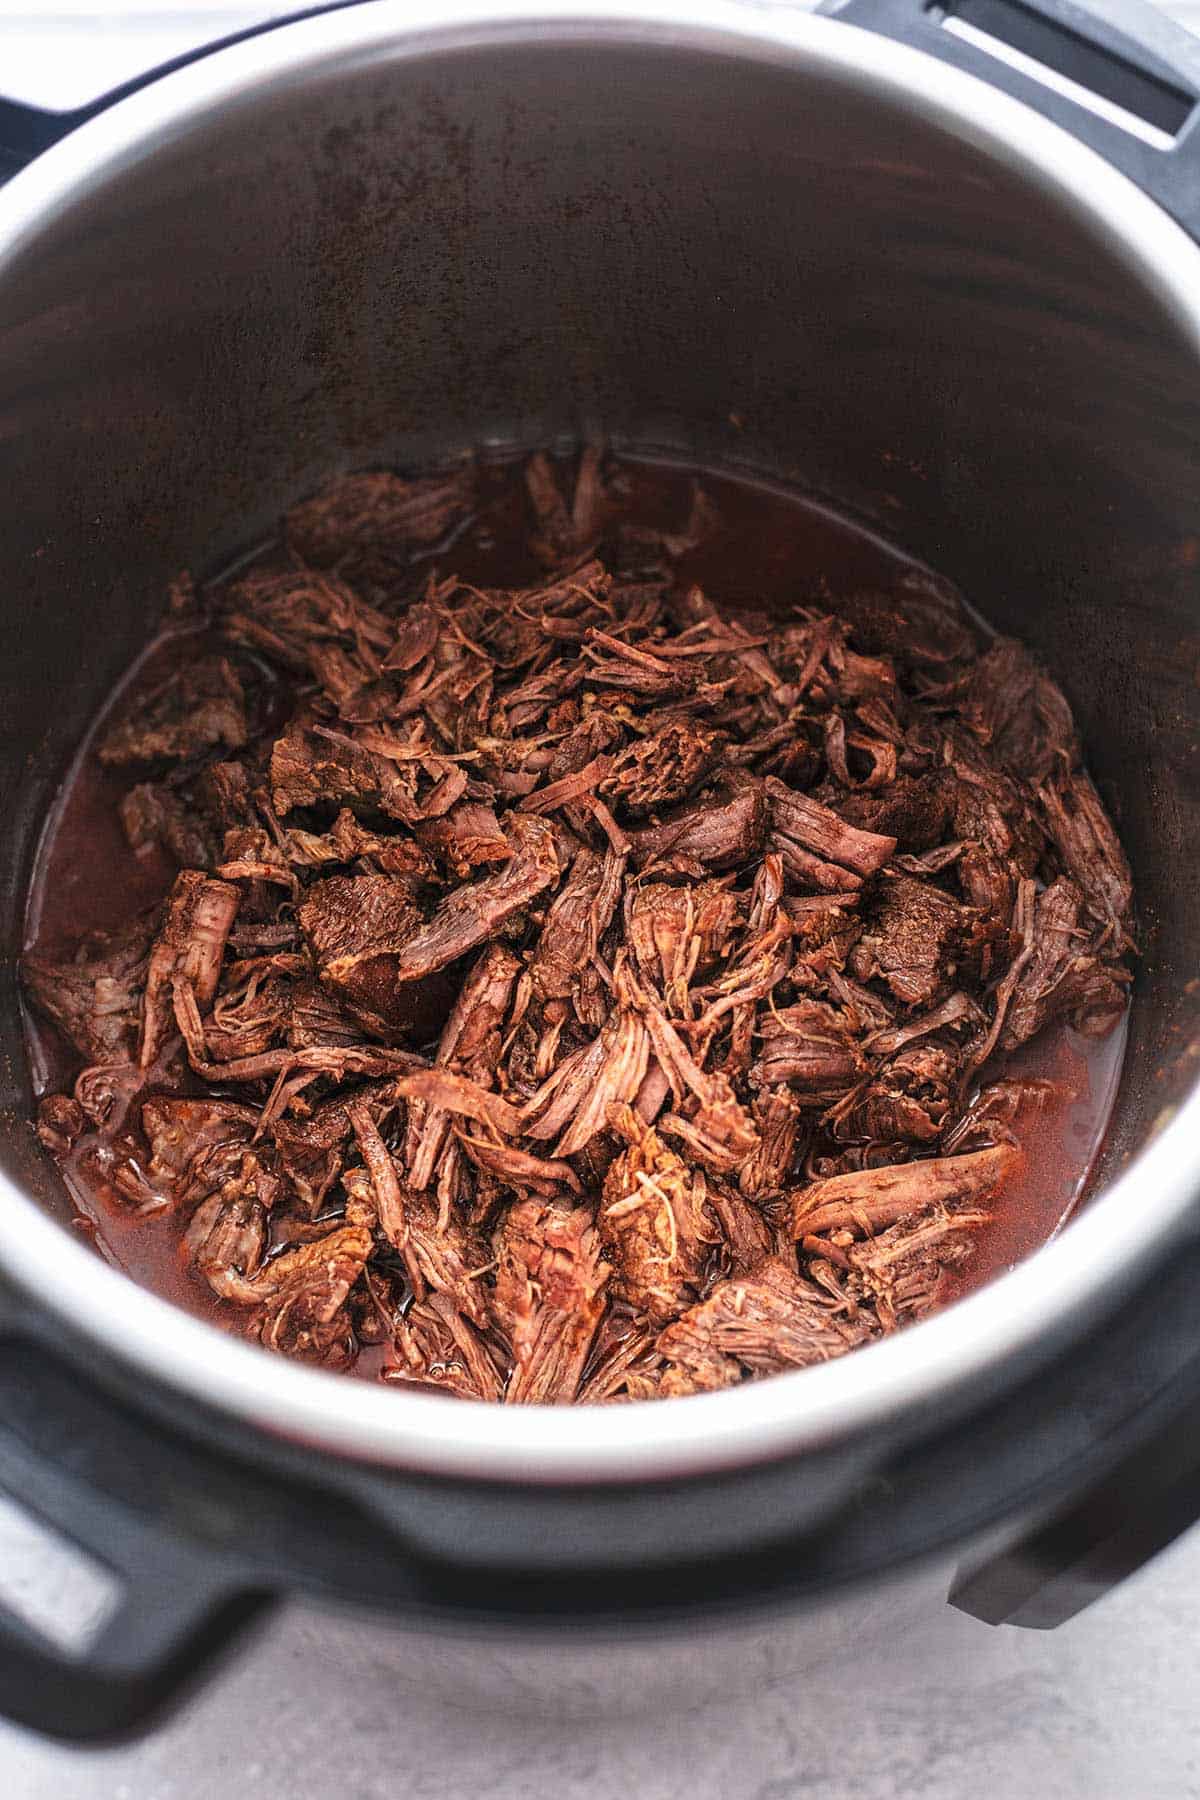 shredded beef in an instant pot pressure cooker